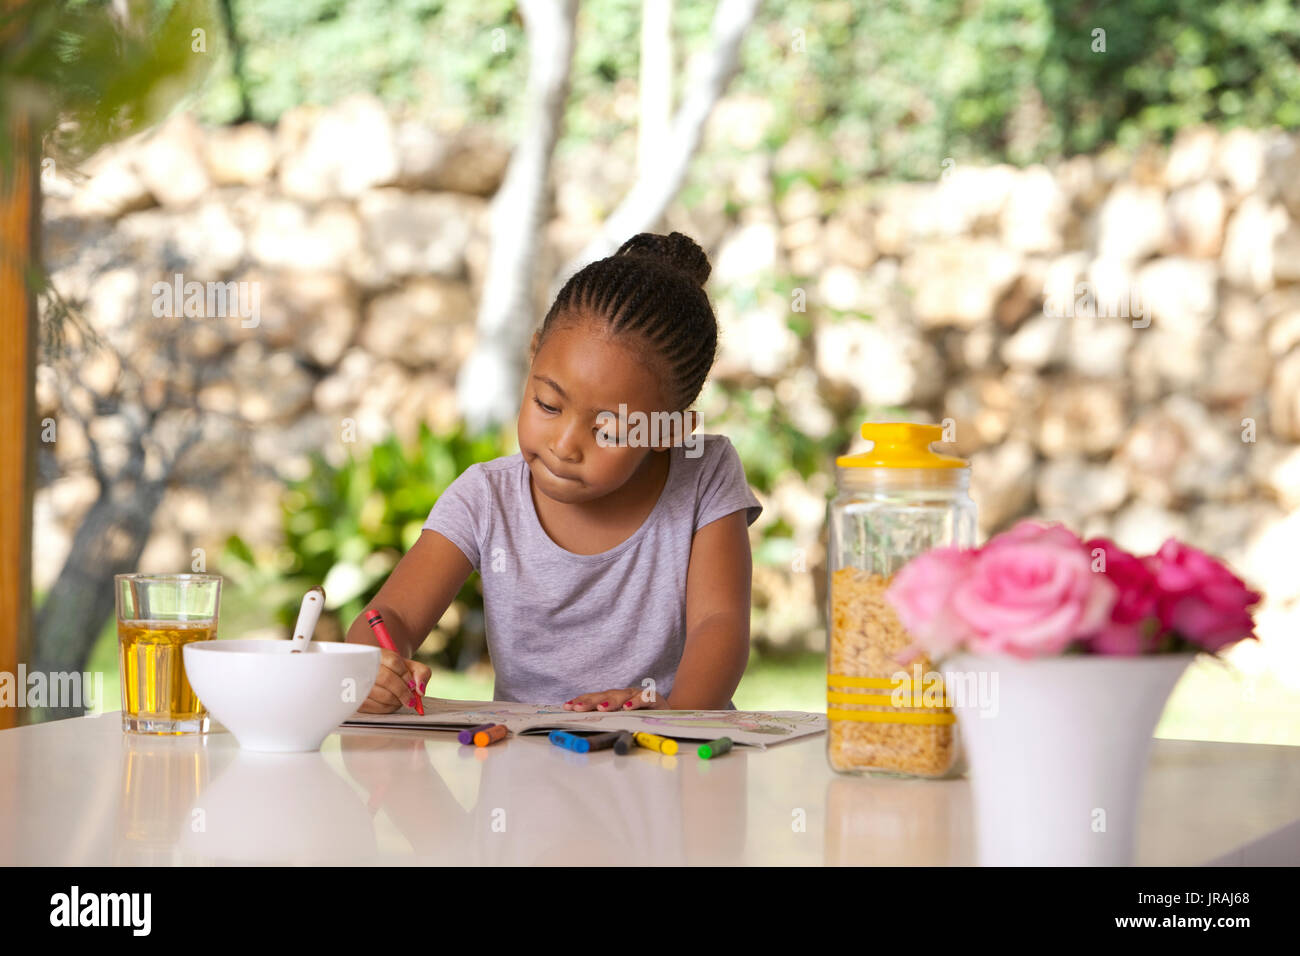 Little girl coloring in with crayons Stock Photo